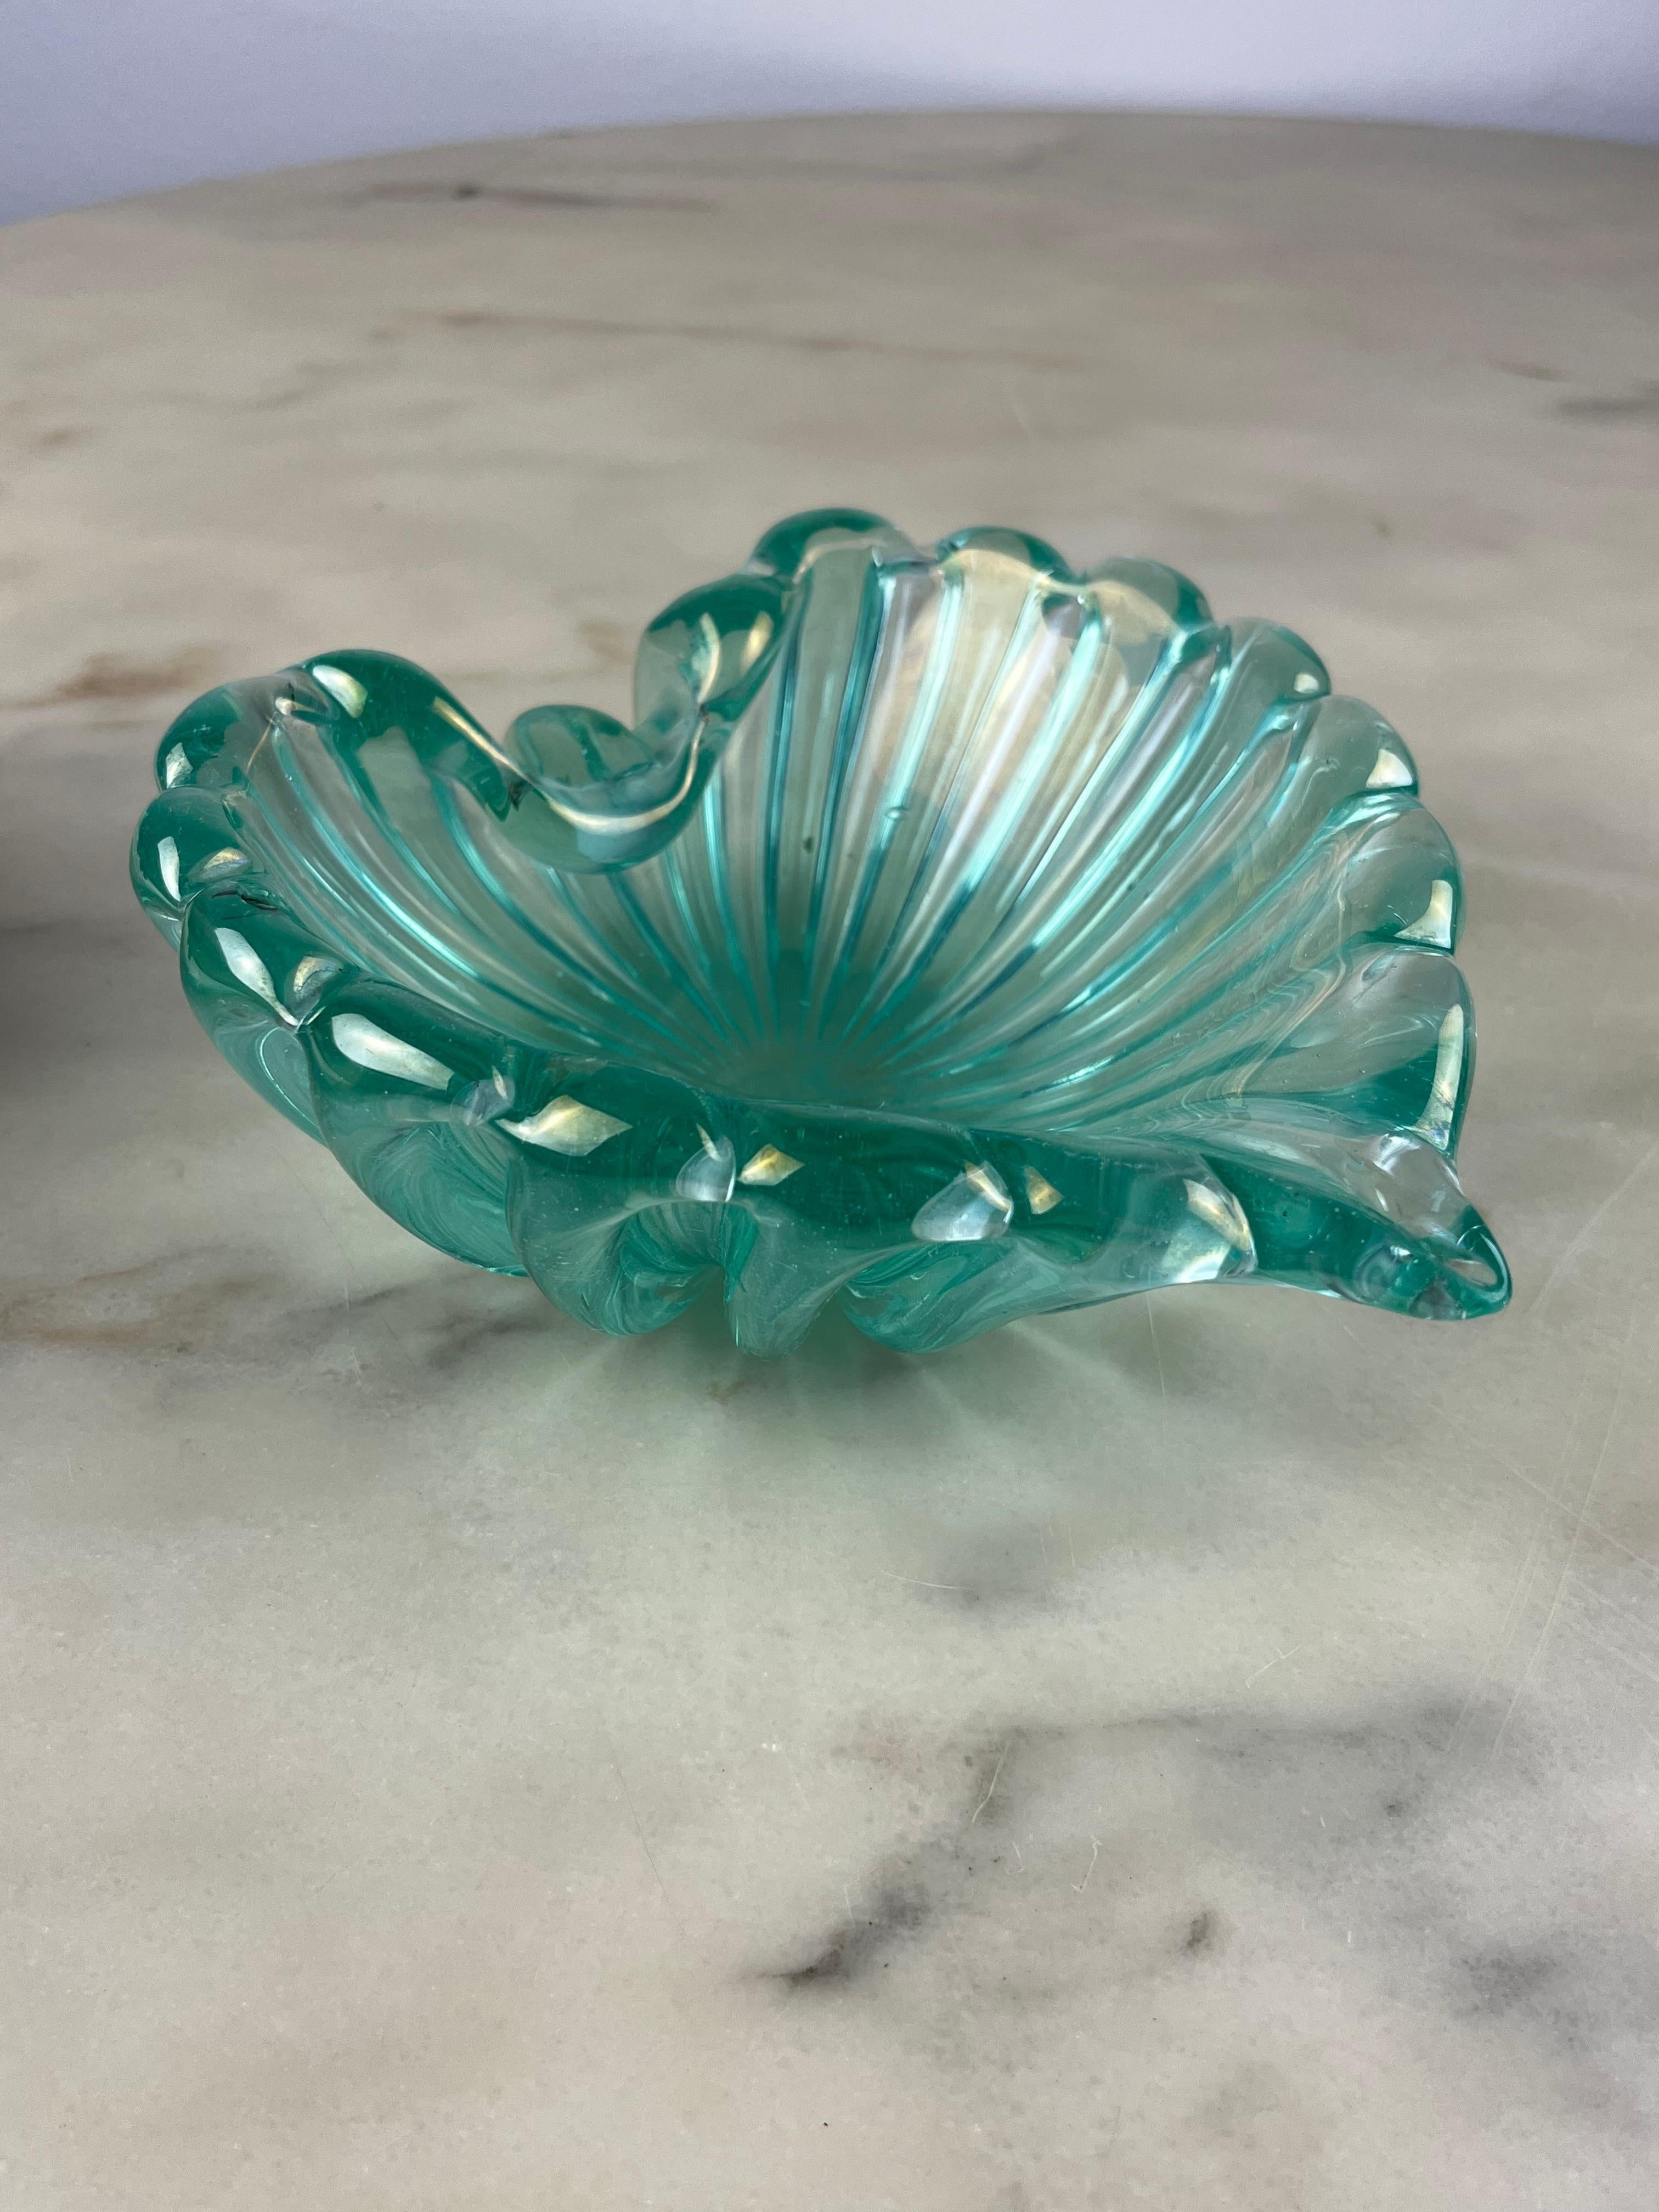 Murano glass ashtray, attributed to Barovier & Toso, Italy, 1950s.
Nile green colour, it was bought by my great-grandfather in Venice.
It has a small chip, as evidenced by one of the descriptive photographs.
Very rare object to find today.

Barovier